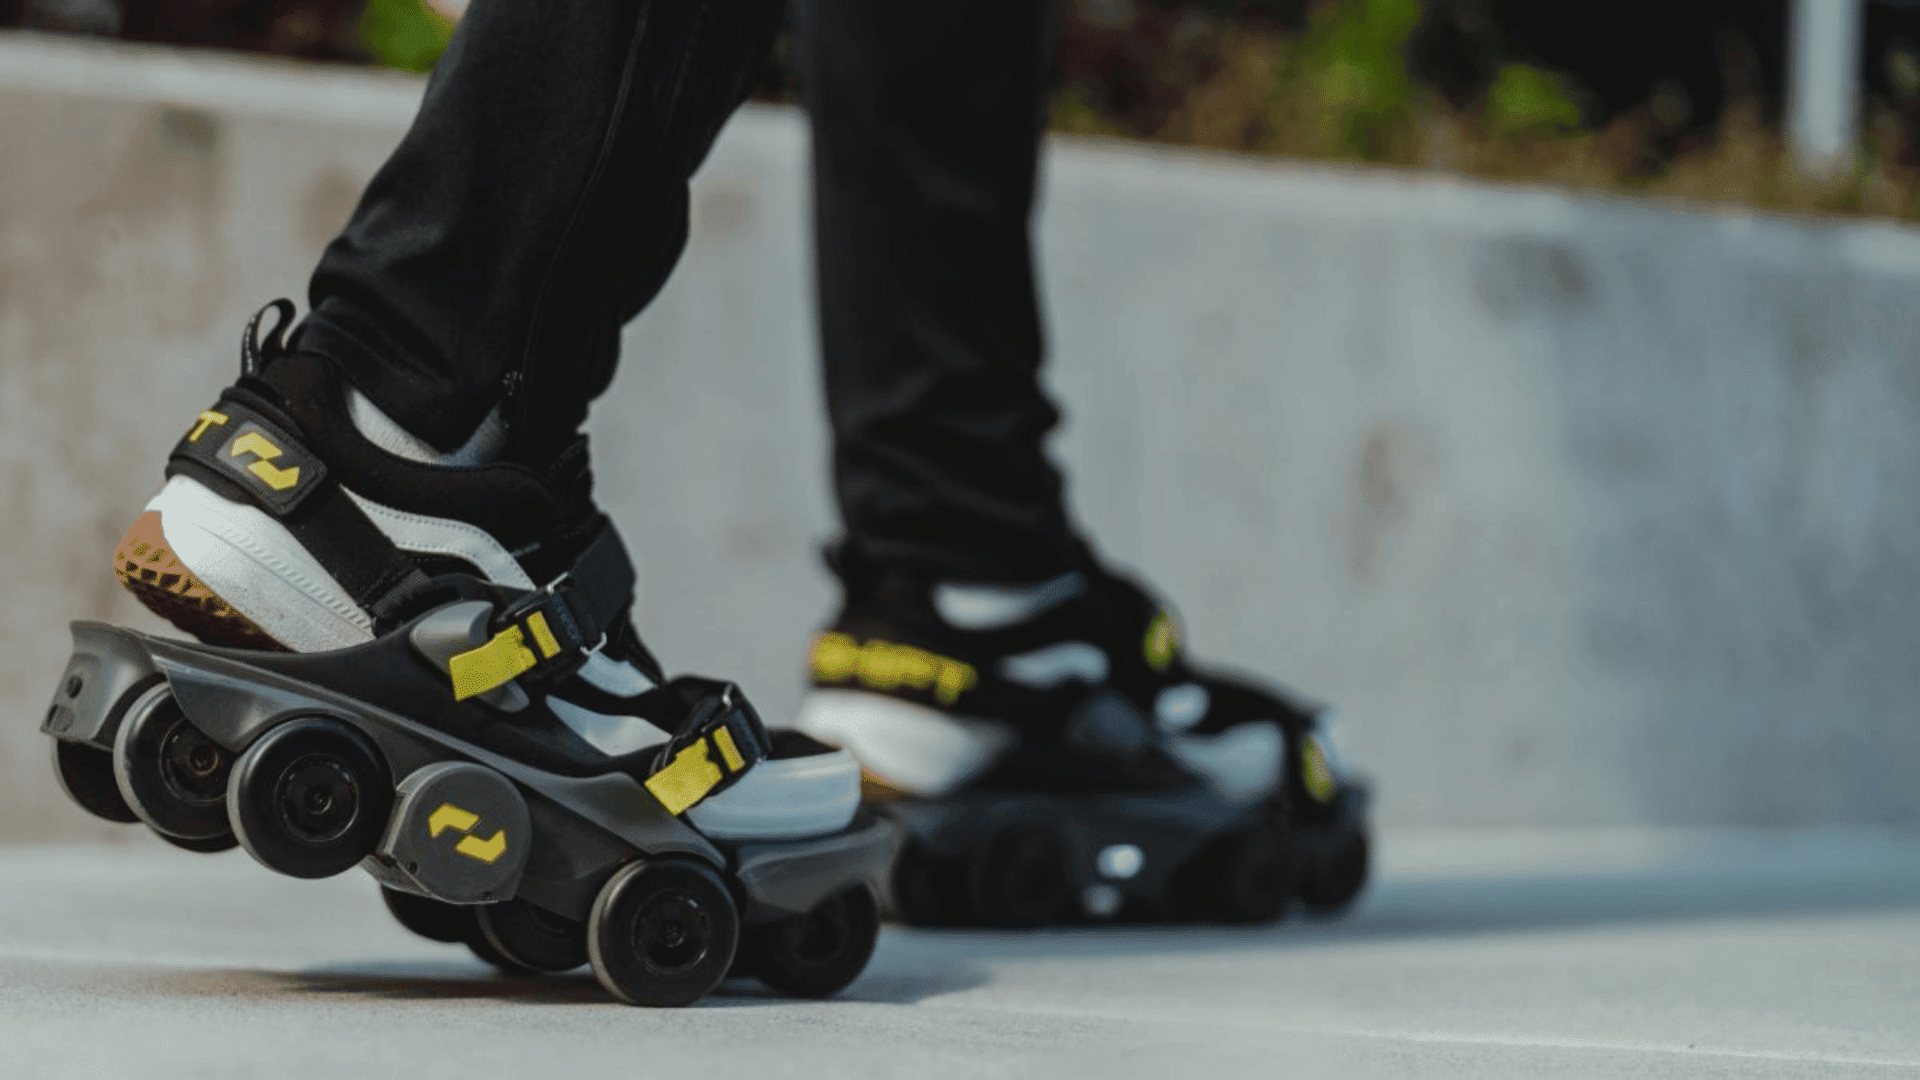 Electric Shoes Help You Walk Up To 7 MPH Moonwalkers